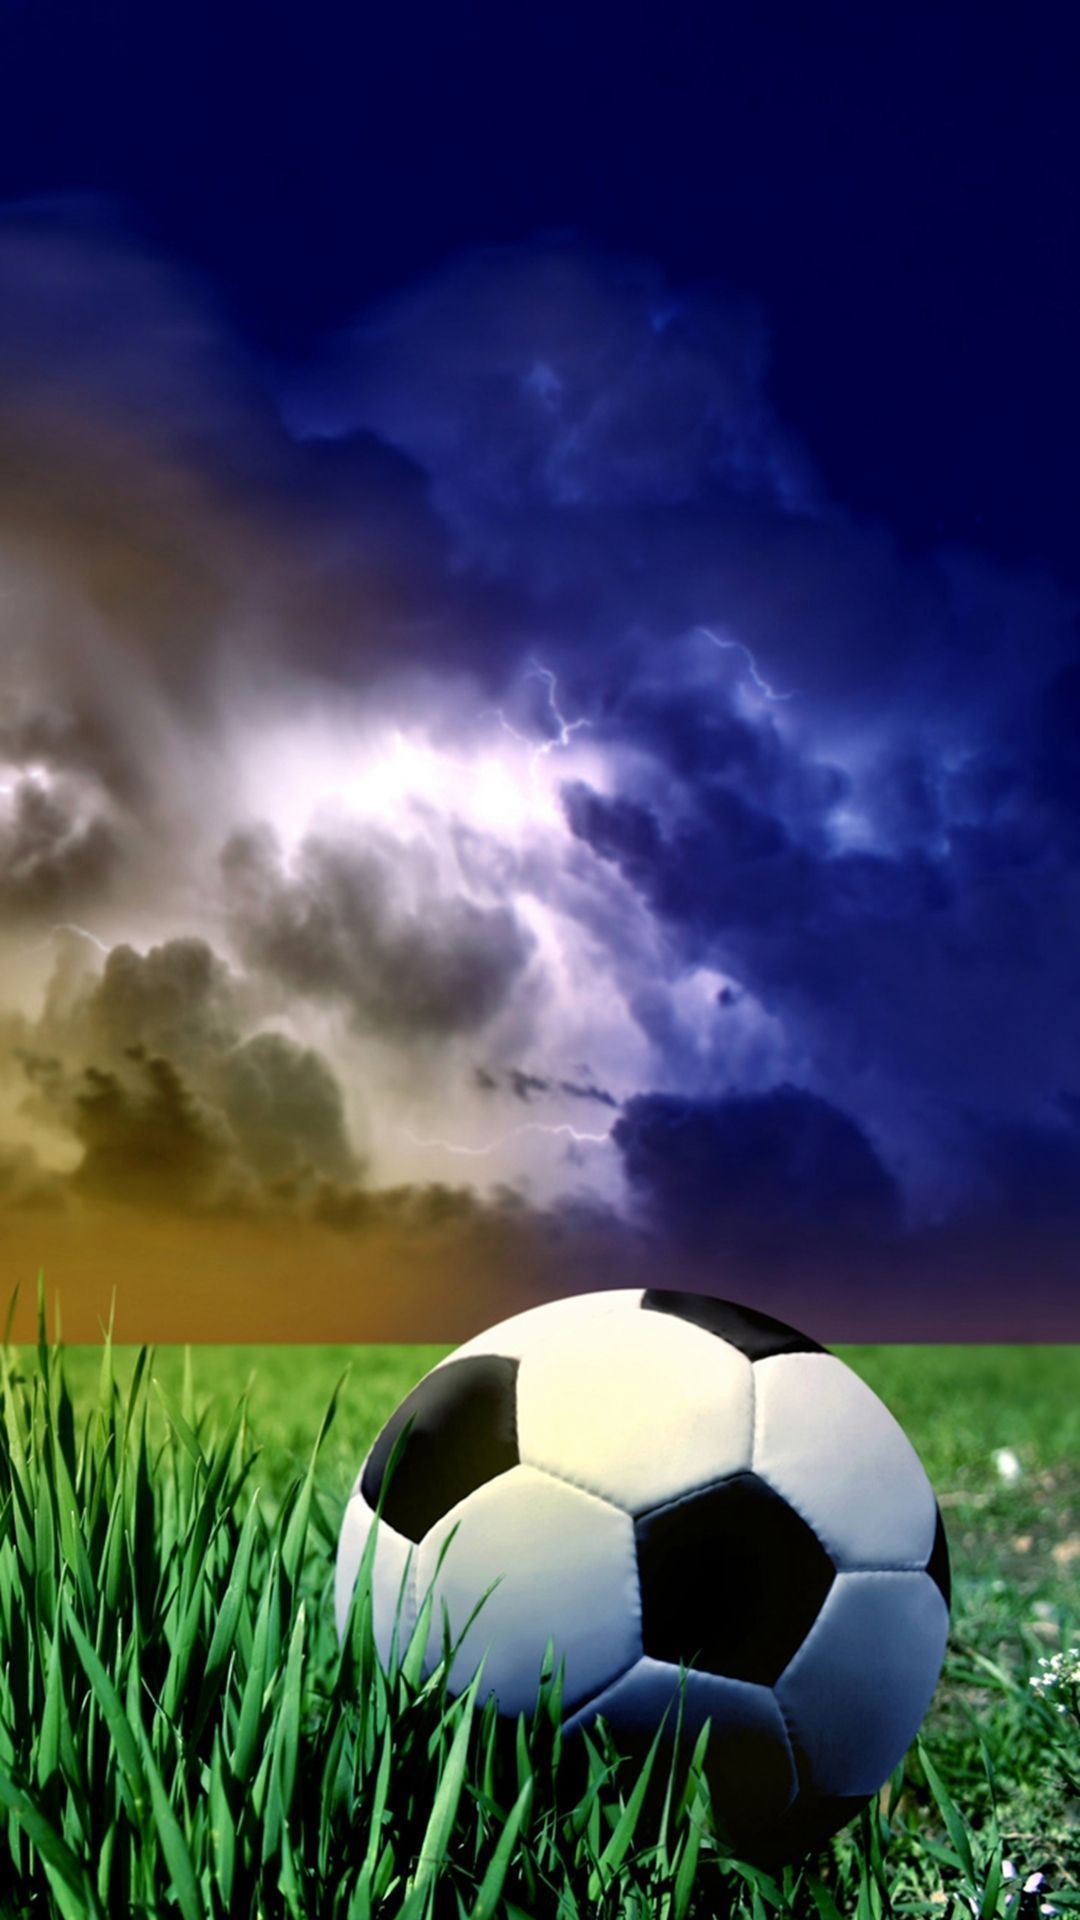 Football Sports Android Background. Football wallpaper, Soccer picture, Football wallpaper iphone